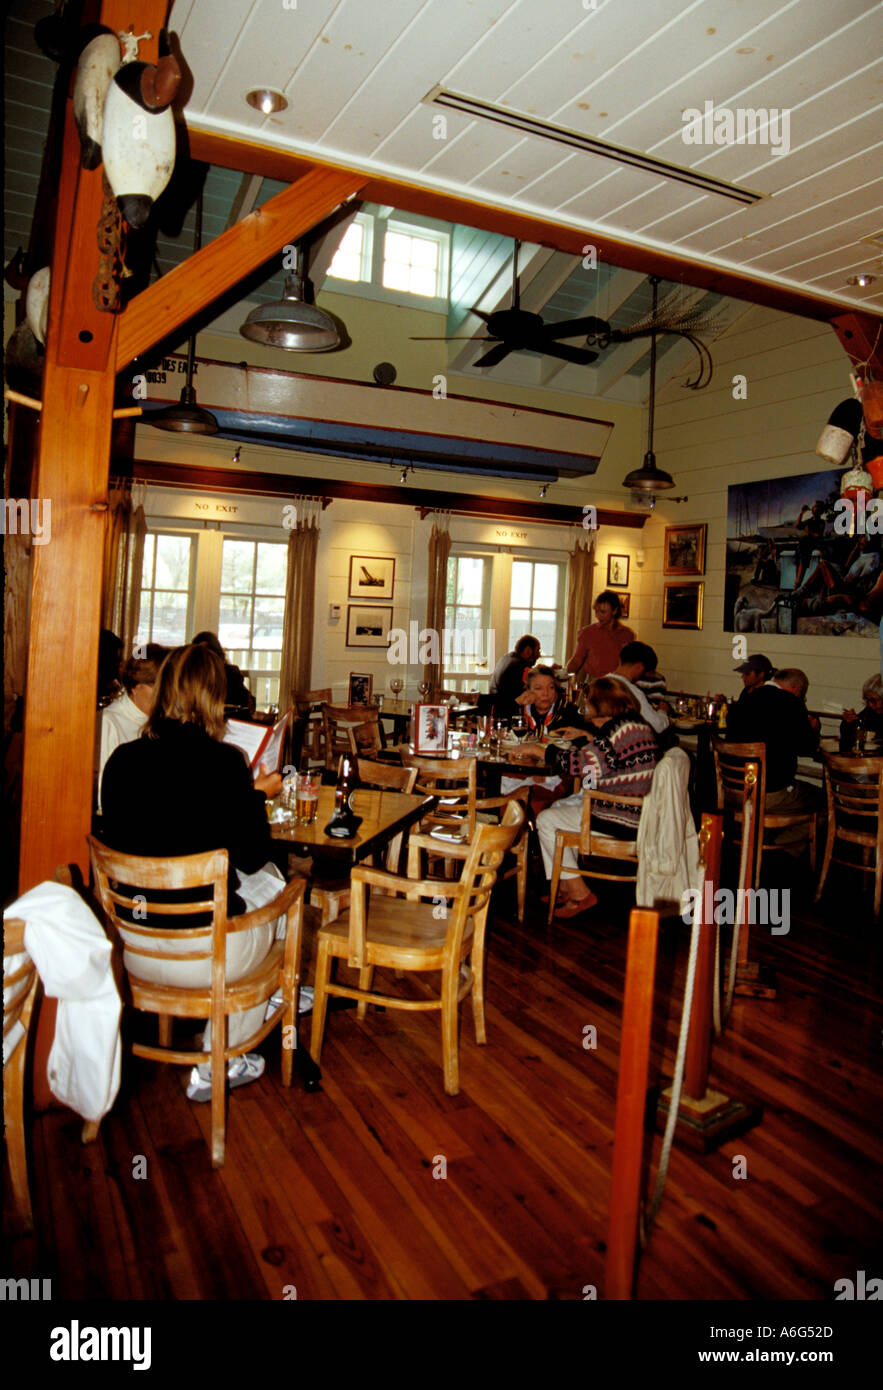 The Boatyard Bar Grill is a well known seafood restaurant in Annapolis MD USA Stock Photo